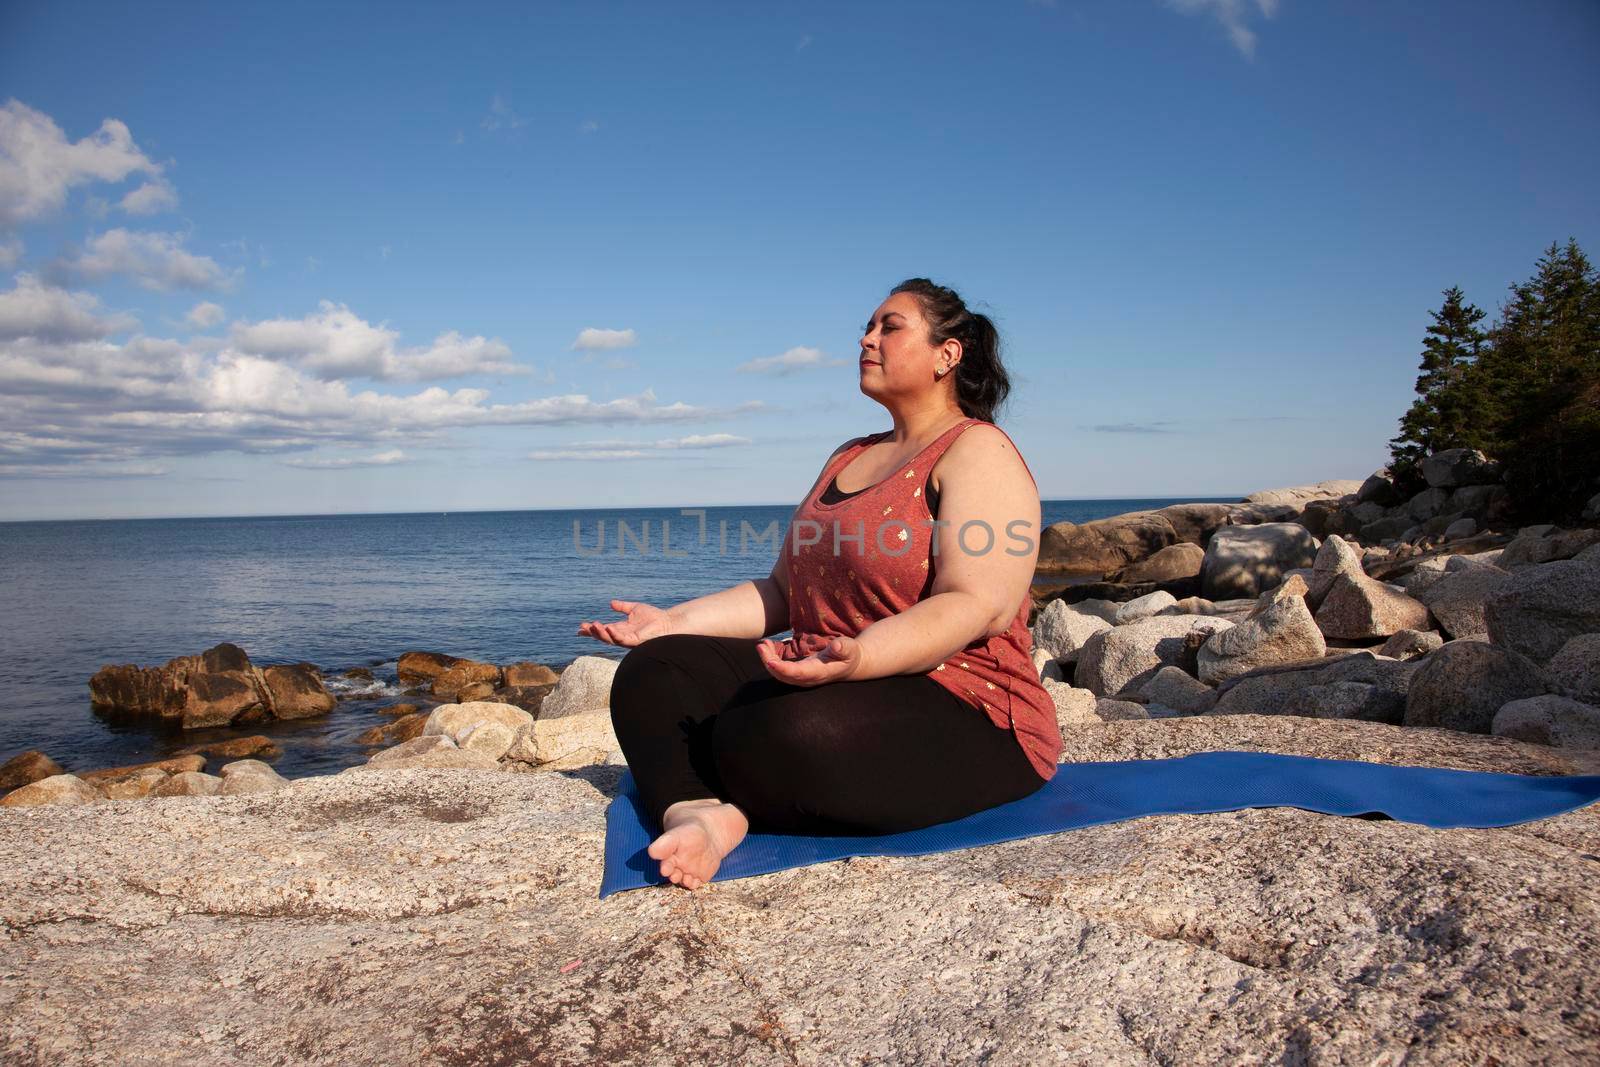 by the ocean a woman is in stillness as she meditates 